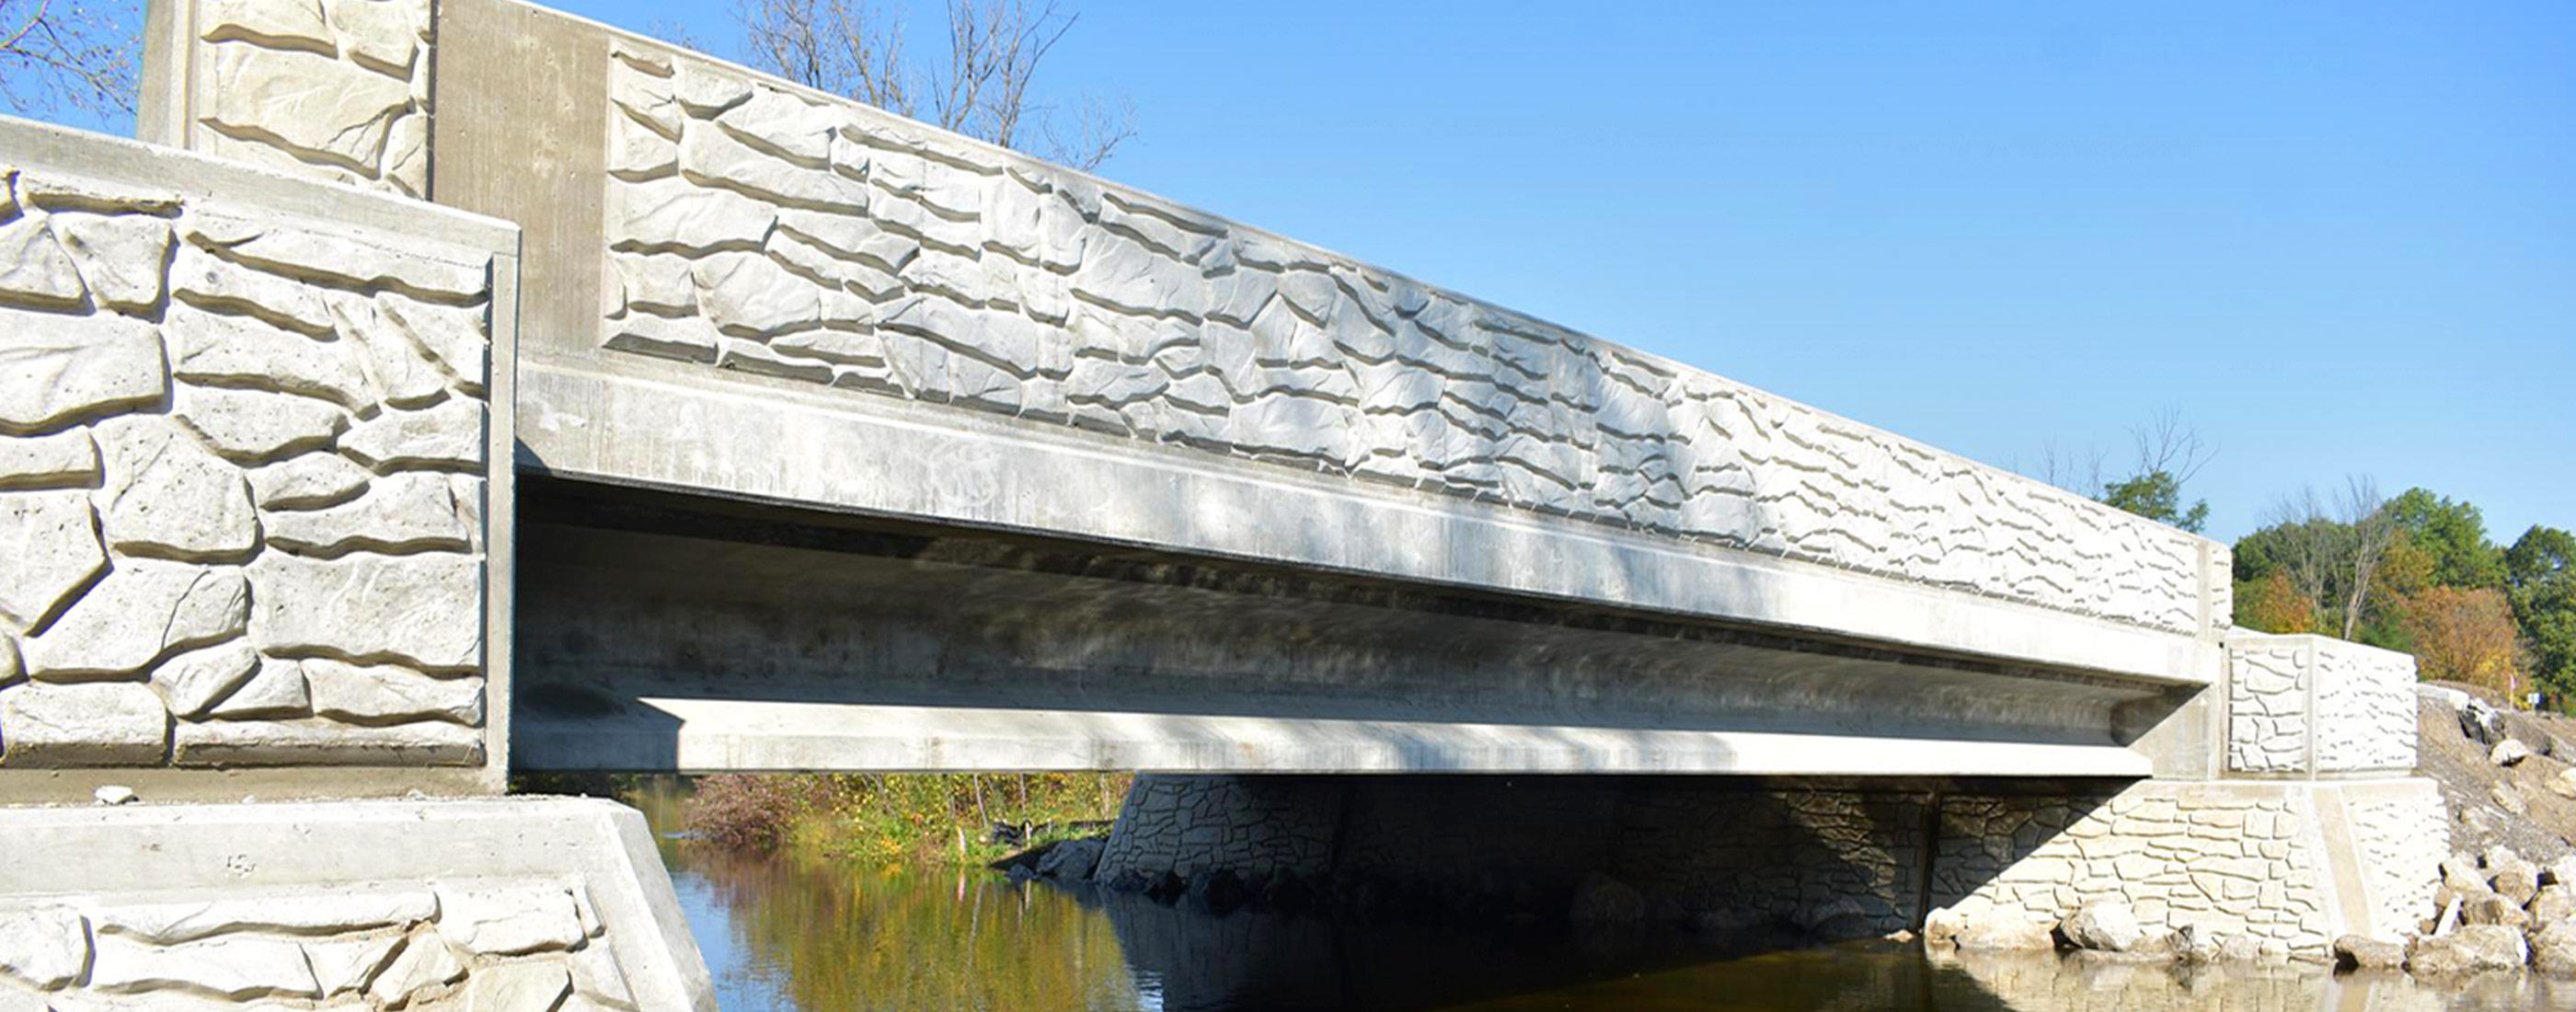 A side view of the new Wixom Road bridge spanning the Huron River.